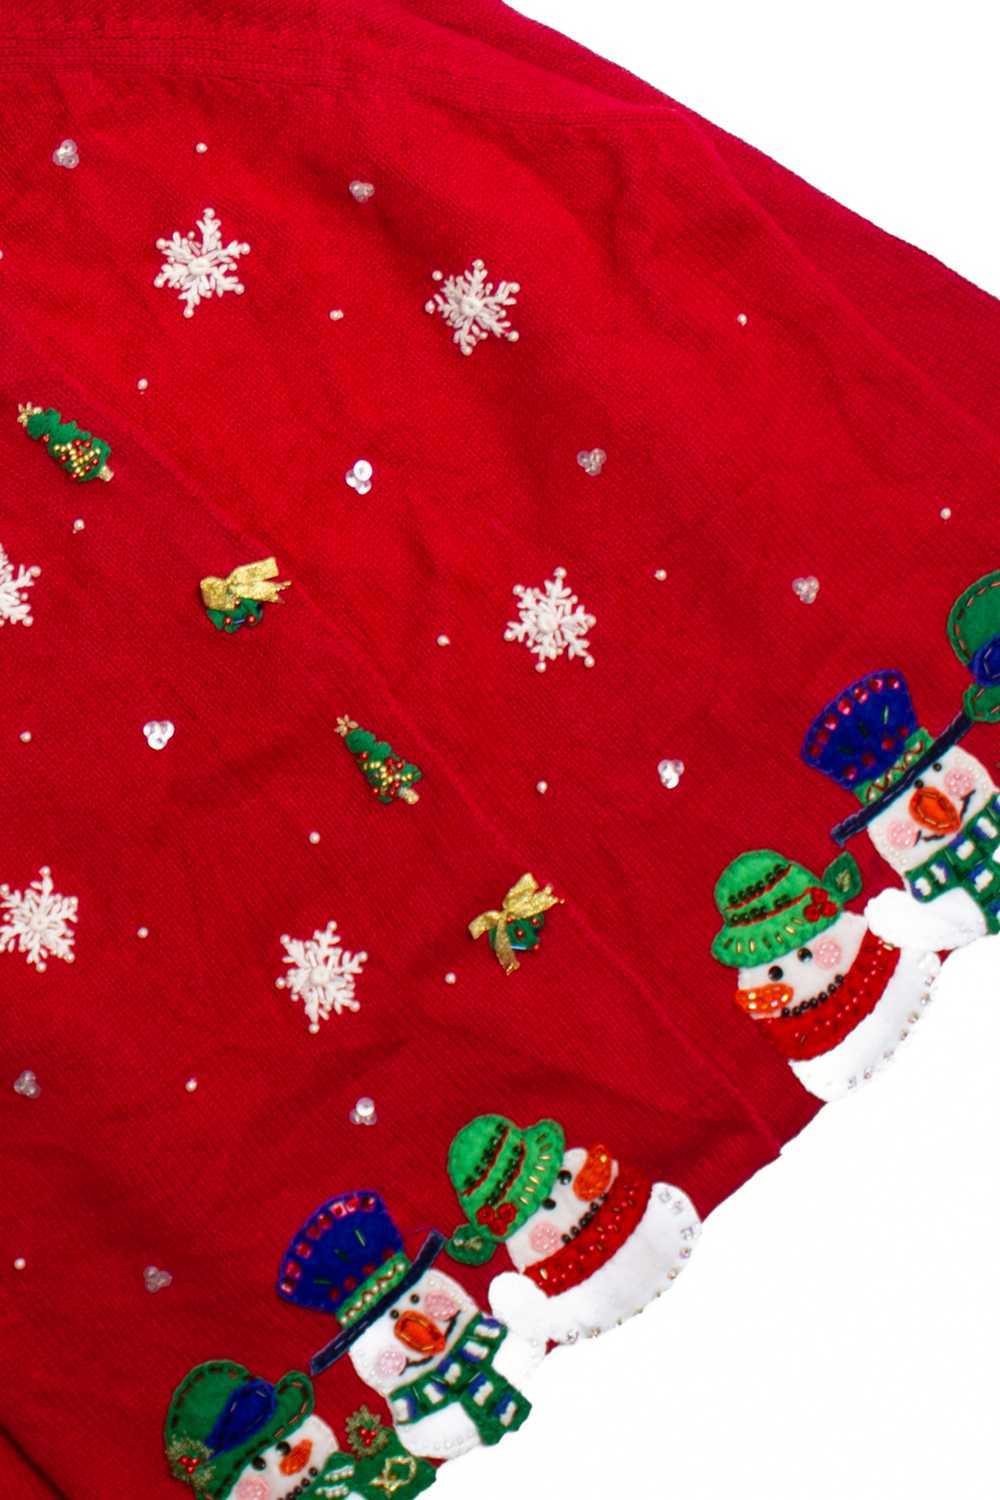 Red Ugly Christmas Sweater 60402 - image 2